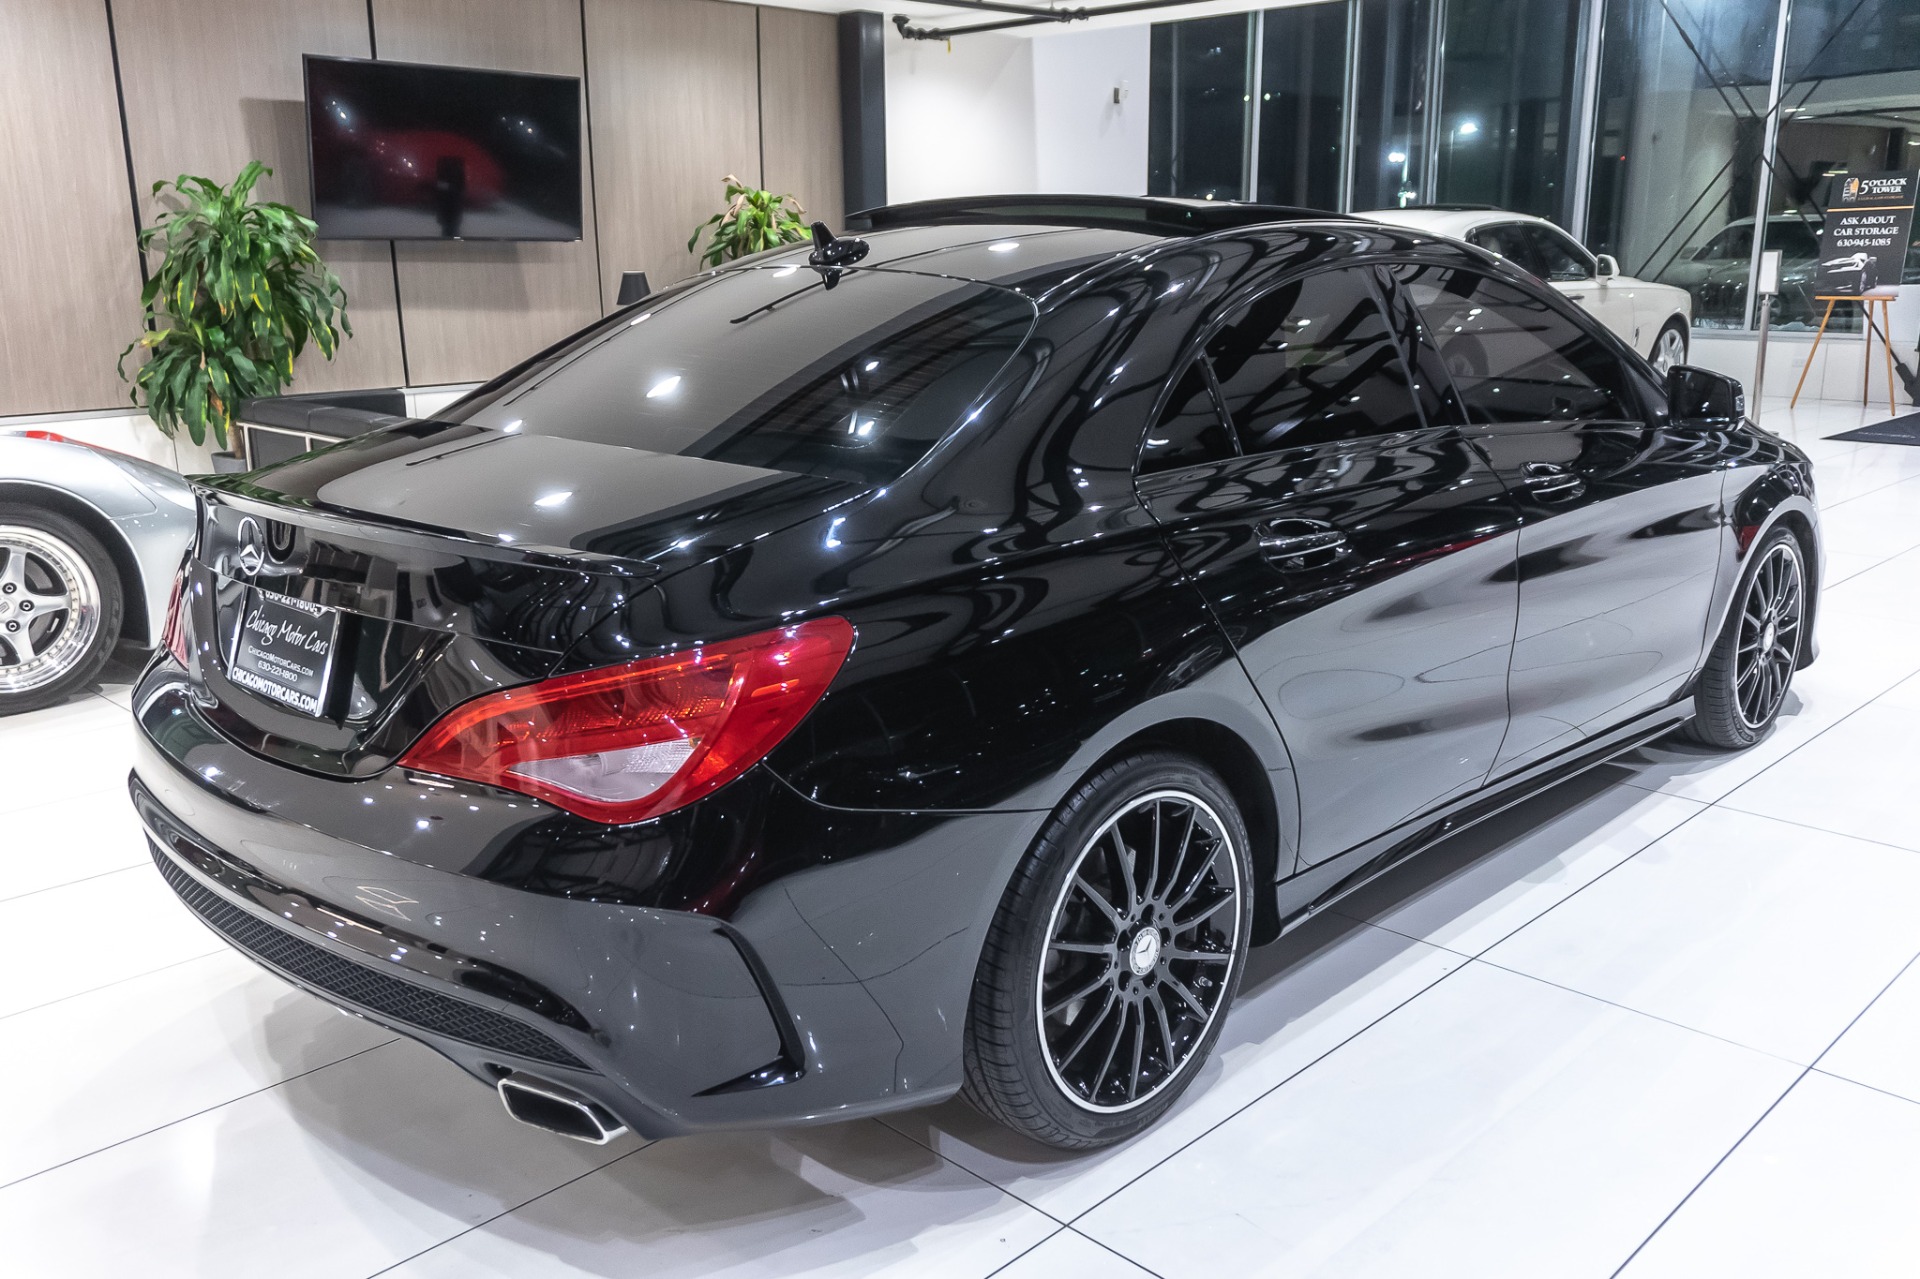 Used-2016-Mercedes-Benz-CLA250-4MATIC-AMG-APPEARANCE-PKG-PANO-NAV-DRIVER-ASSISTANCE